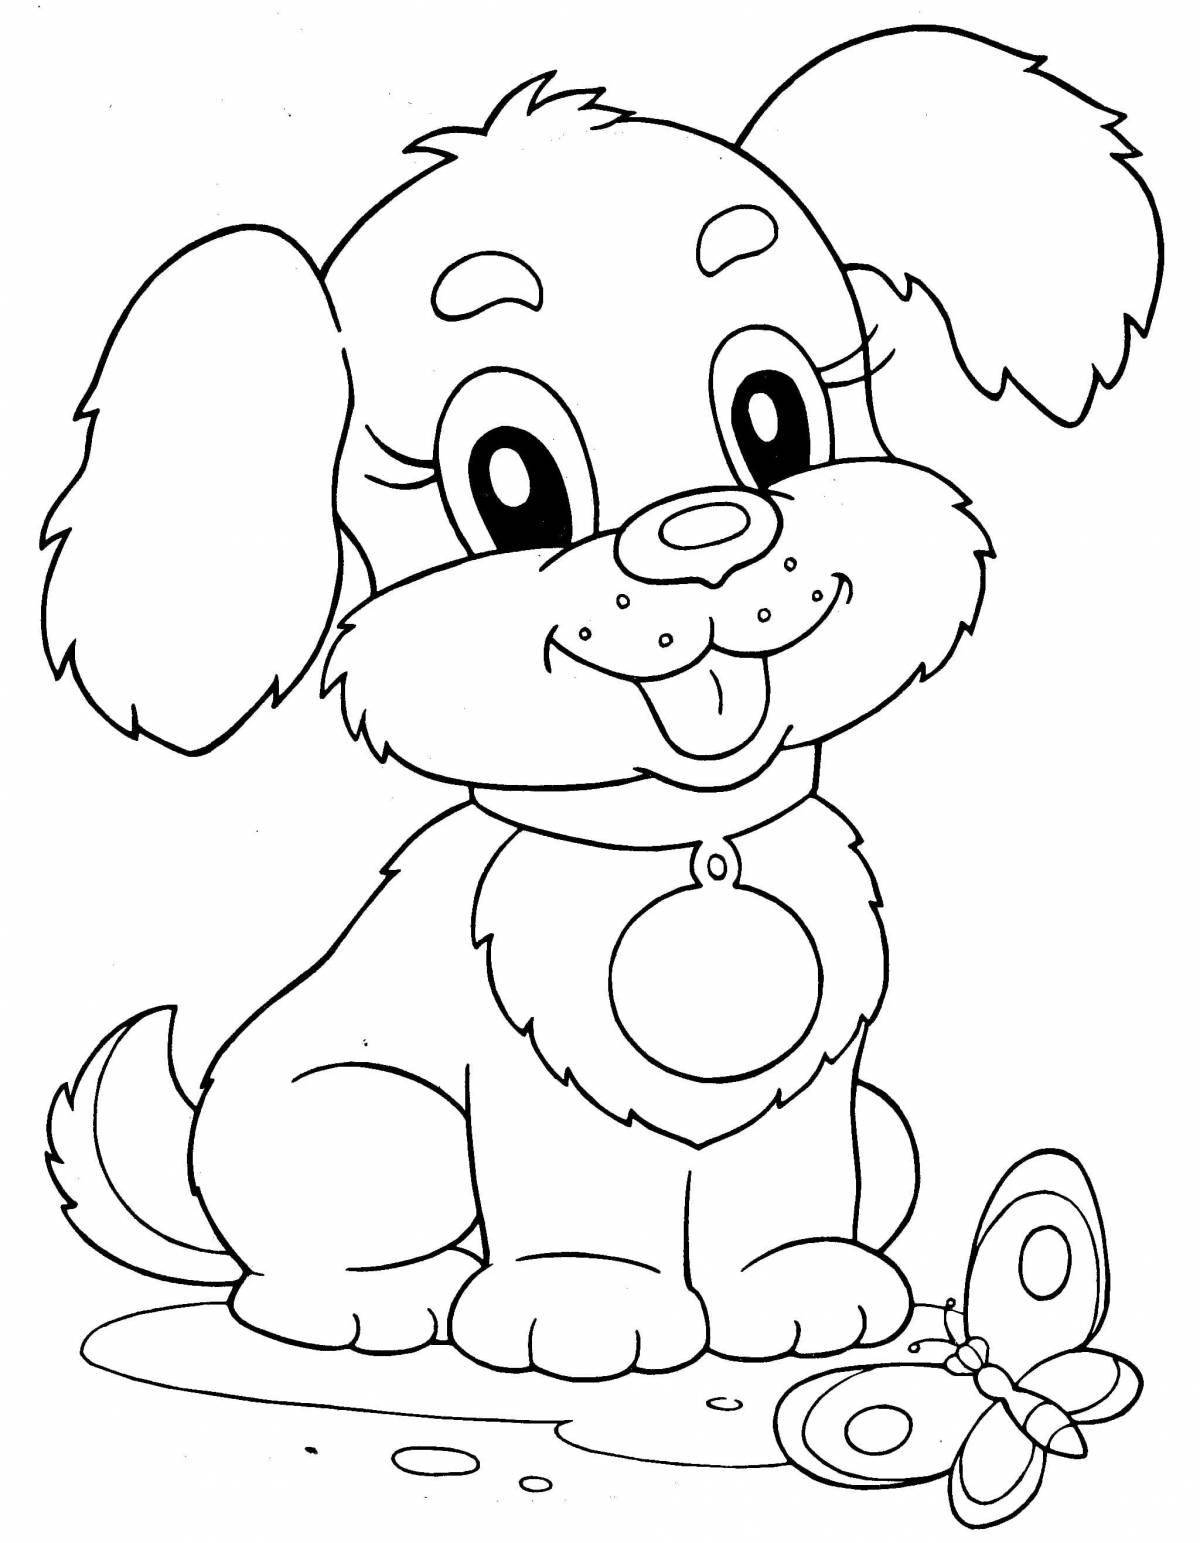 Outstanding animal coloring pages for kids 3 4